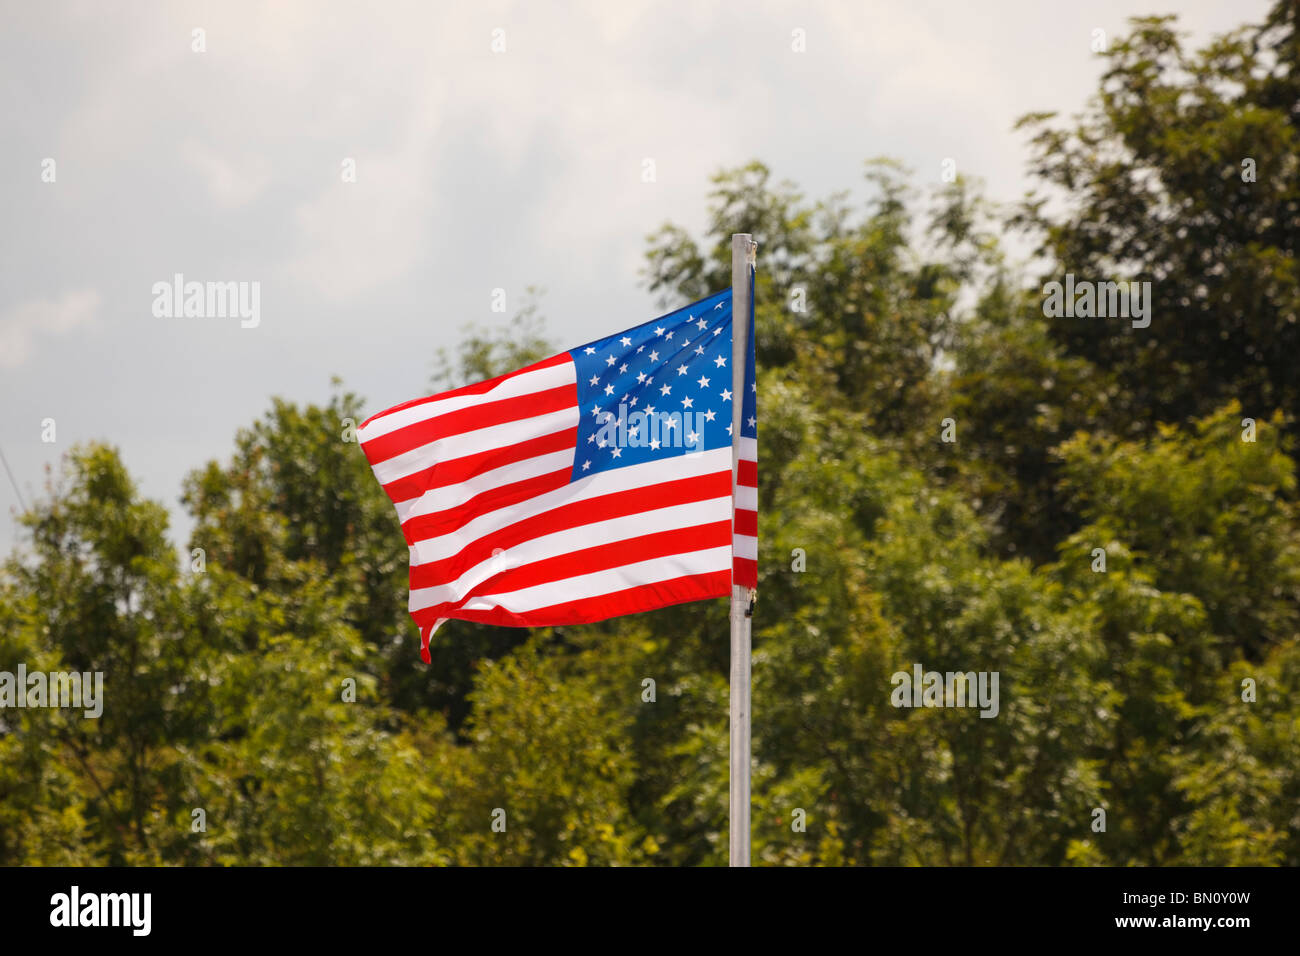 Stars and Stripes, national flag of the United States of America Stock Photo